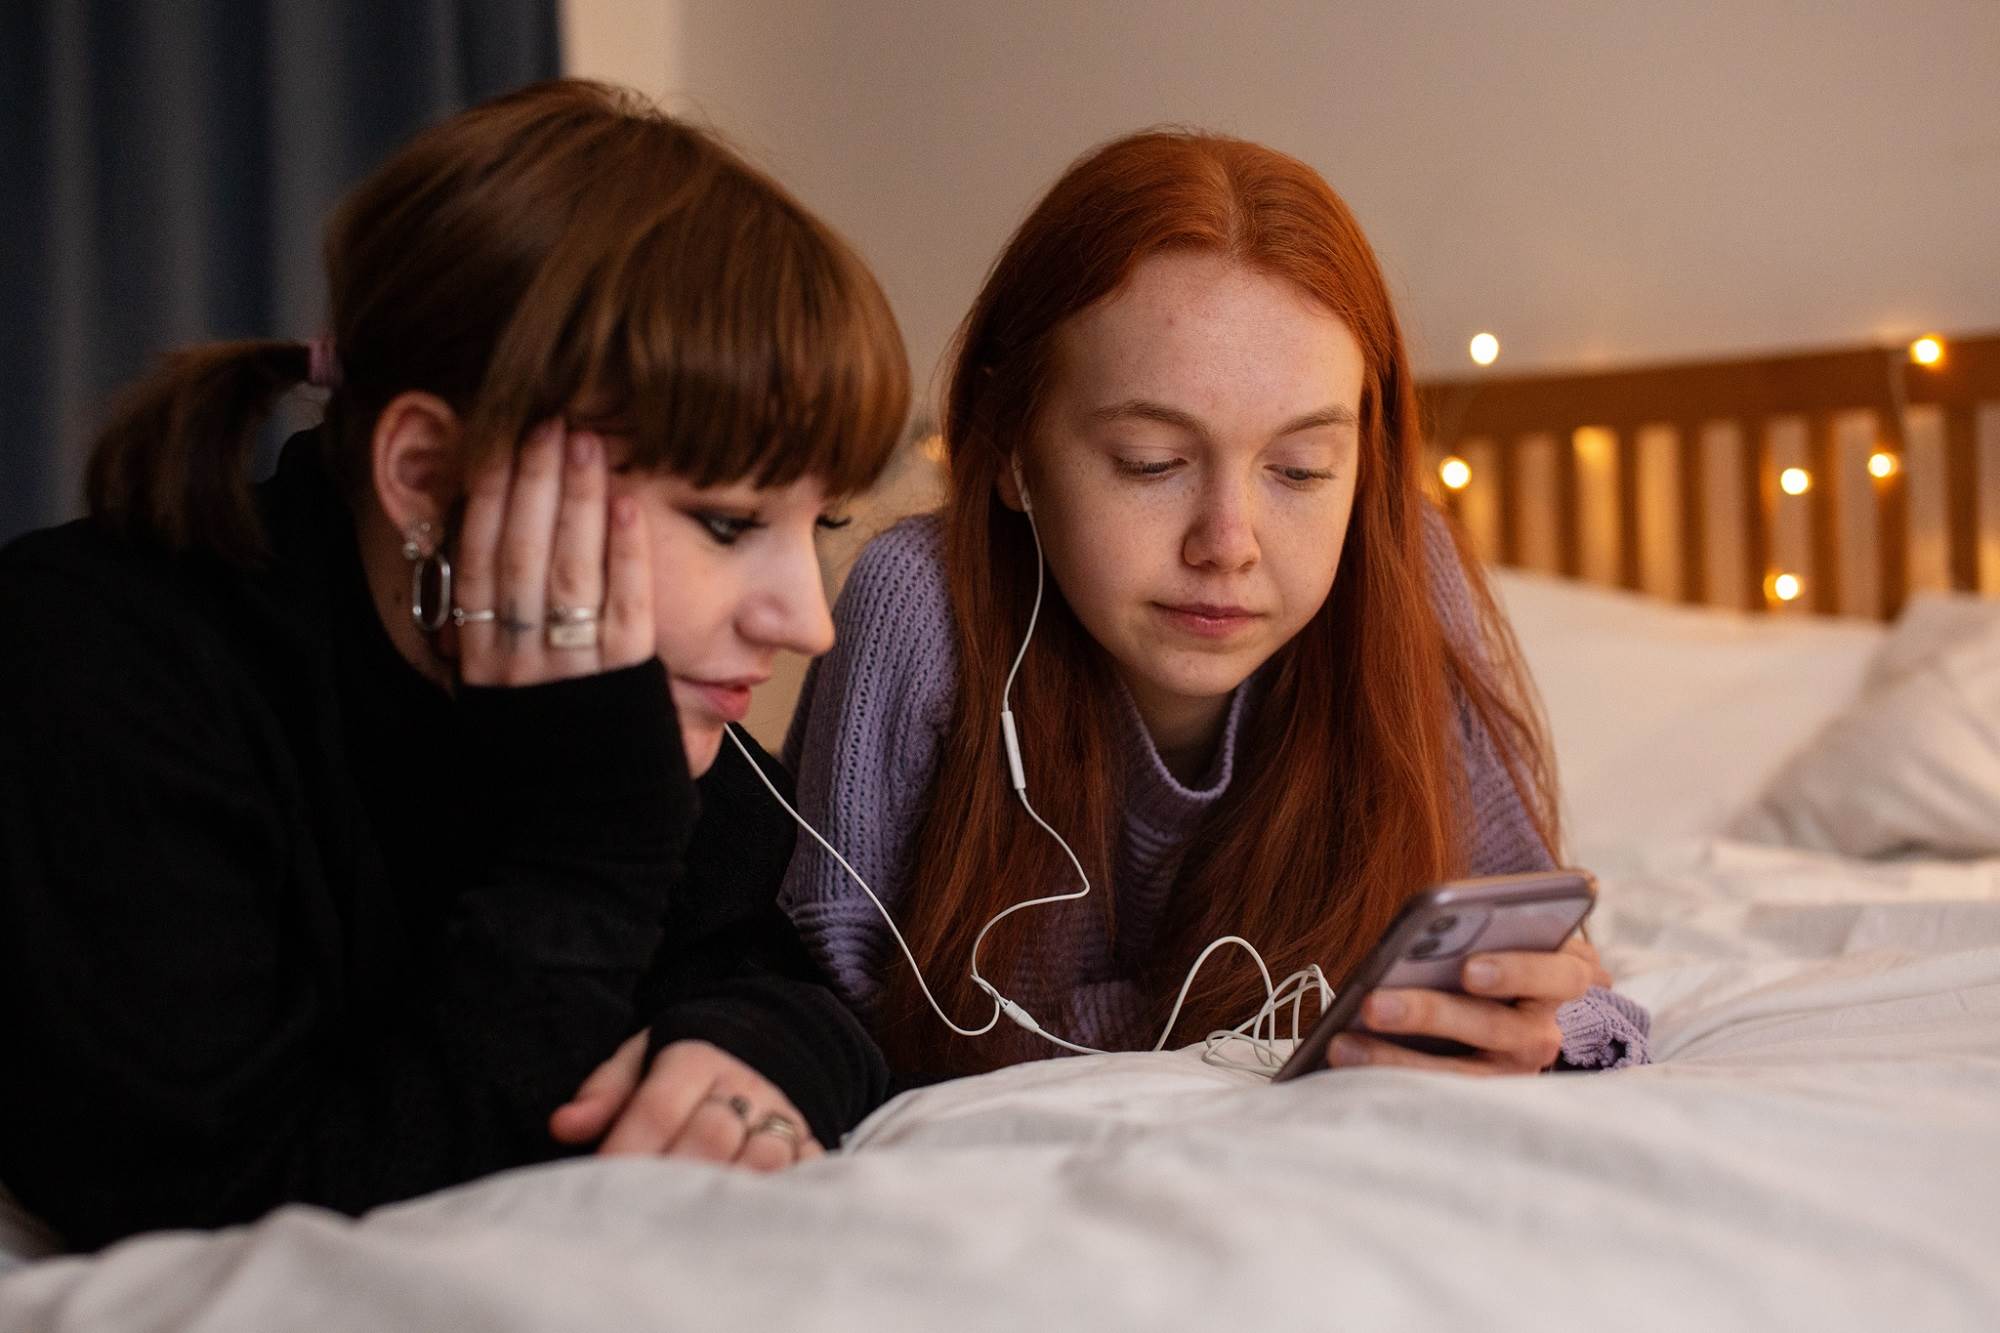 Teen Girls Sharing Music On Phone Neutral Expression